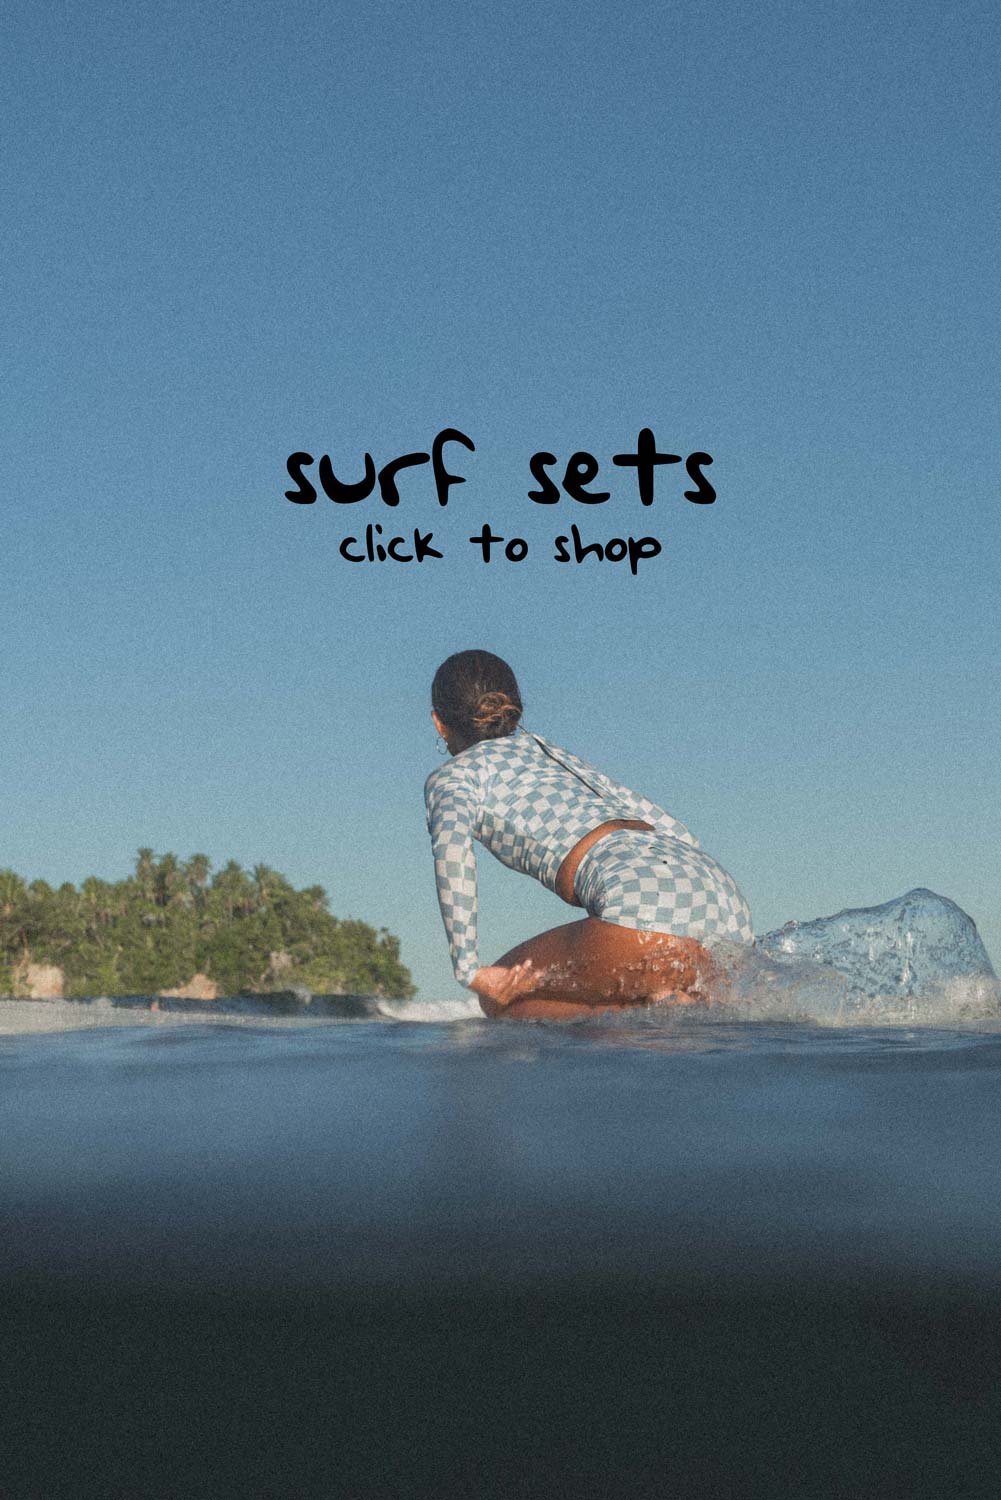 woman on a surfboard paddling and wearing a surf set with blue check print